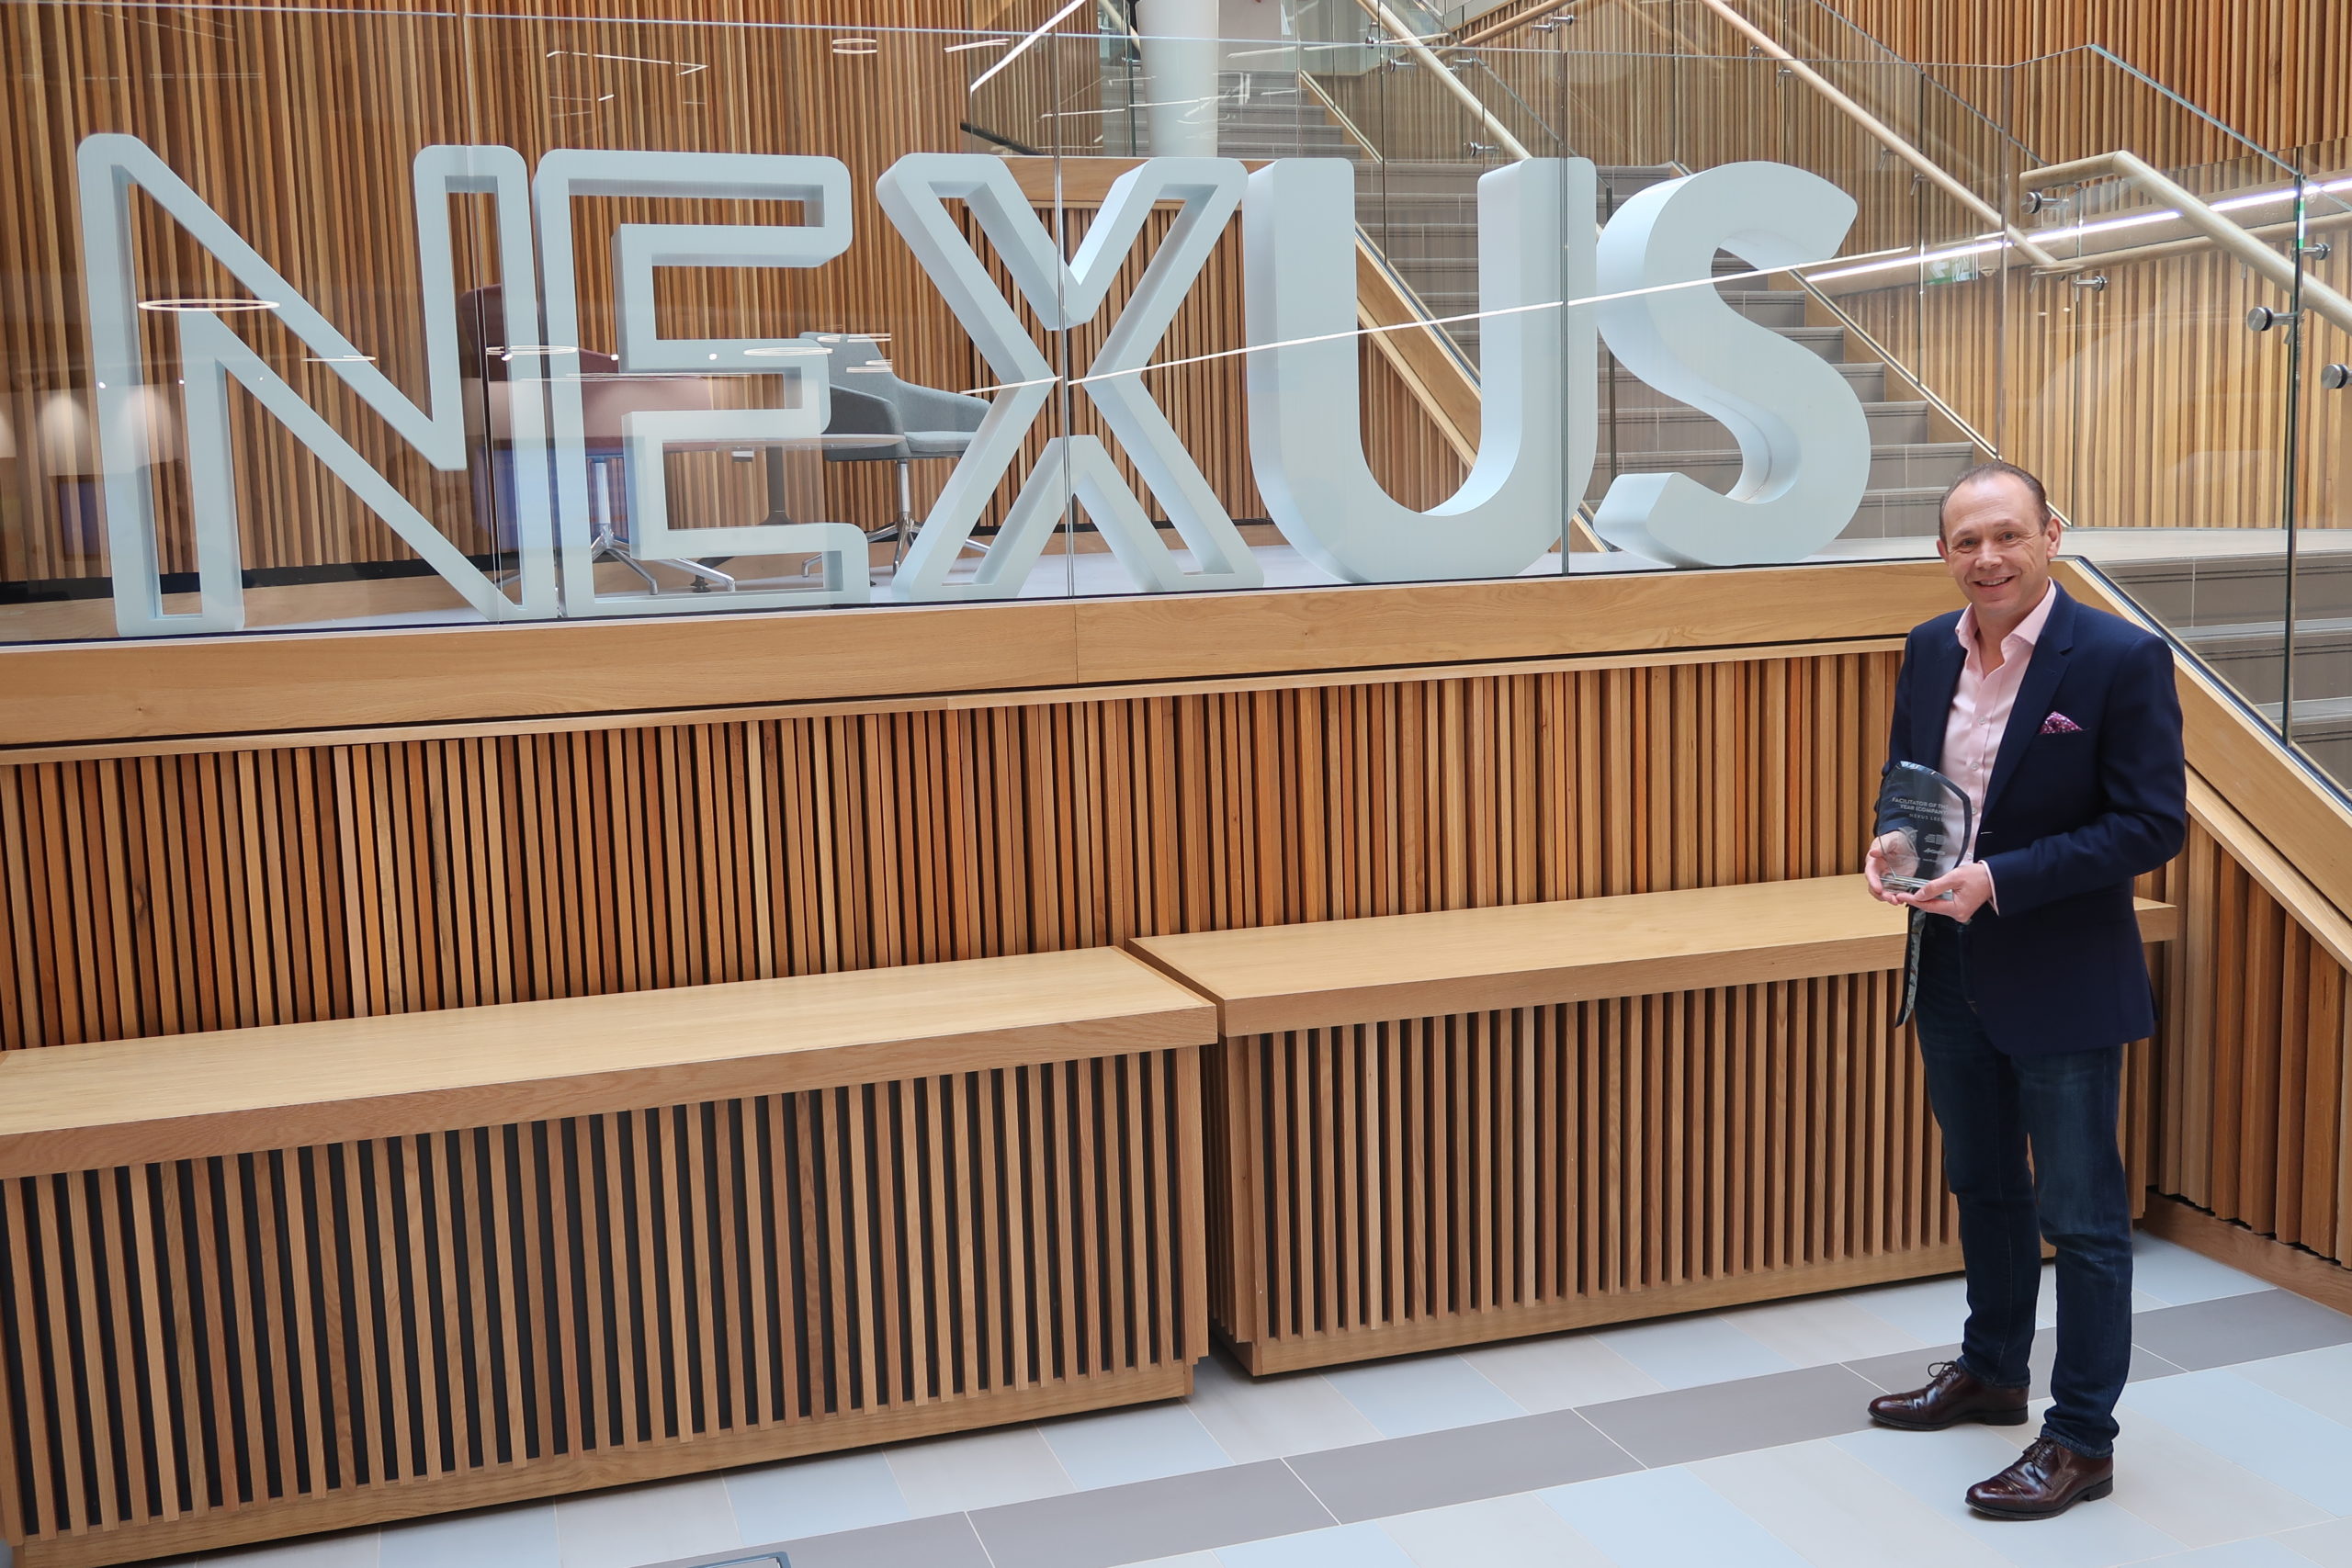 Dr Martin Stow (Nexus Director) standing in front of large Nexus logo holding a glass Leeds Digital Festival award trophy